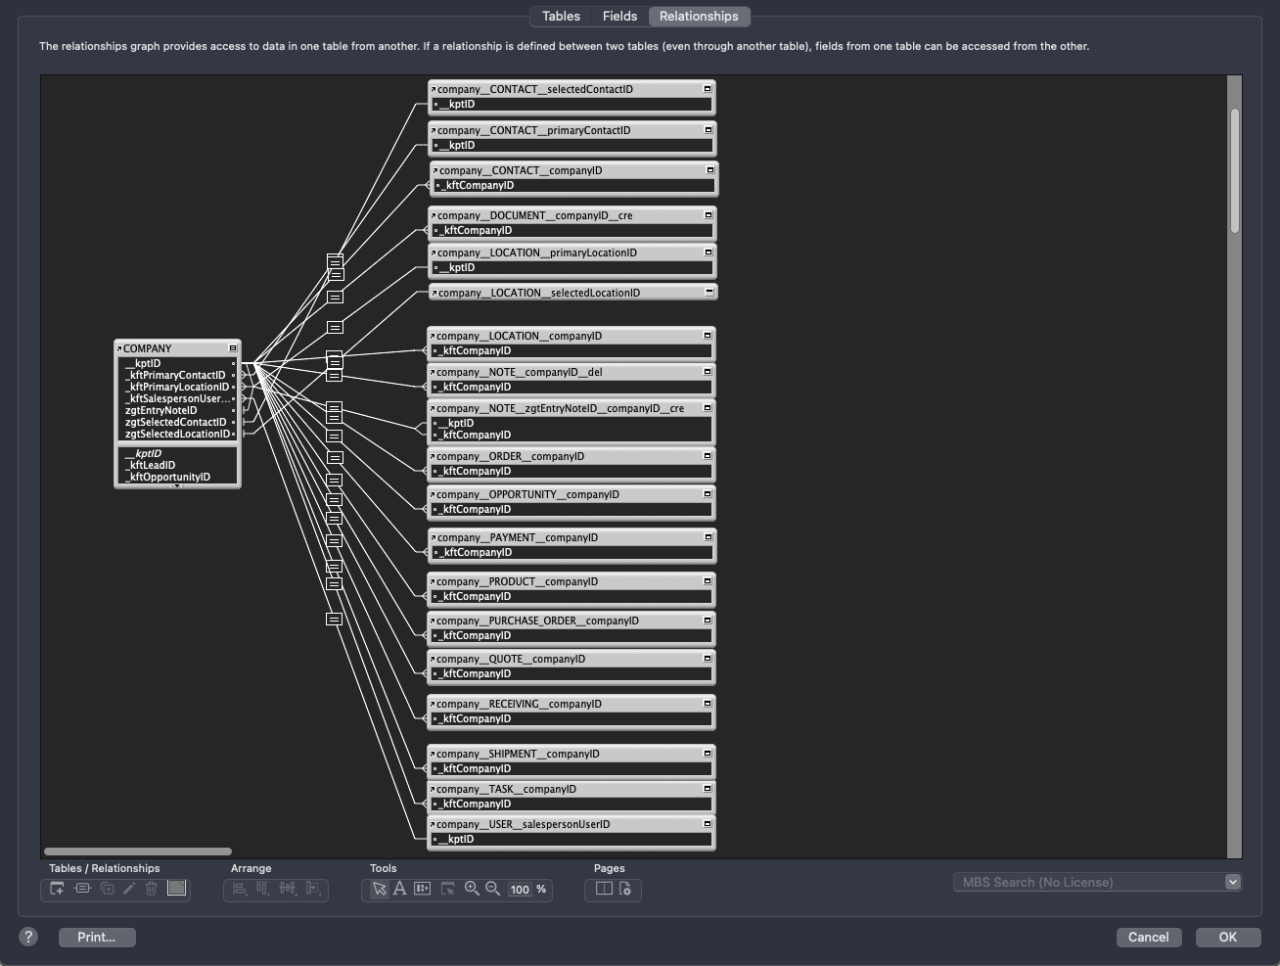 FileMaker Database Relationship Graph View.